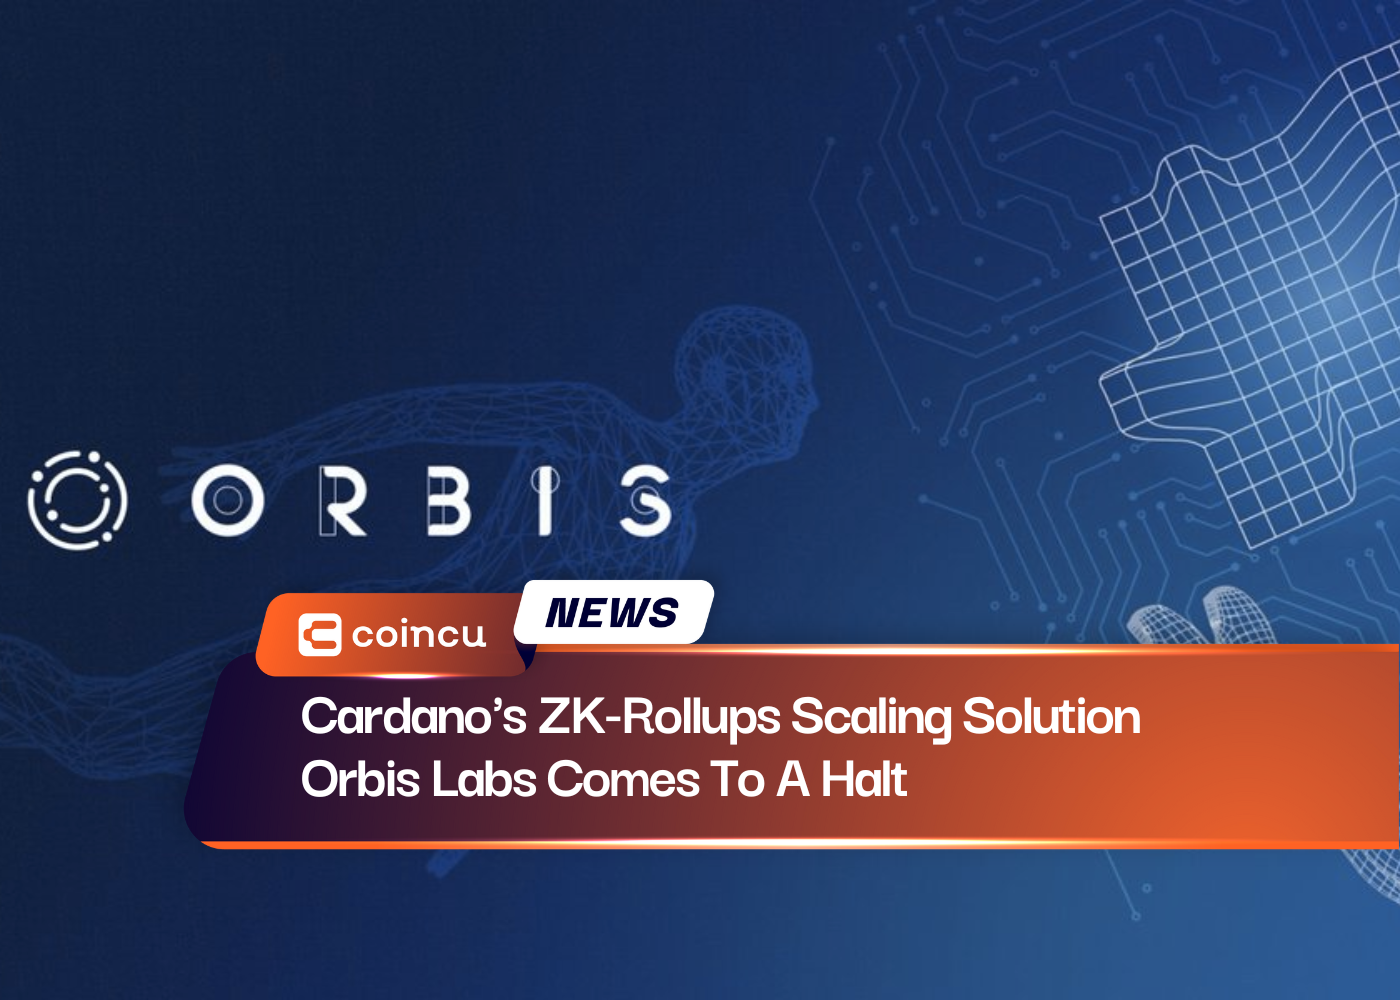 Cardano’s ZK-Rollups Scaling Solution Orbis Labs Comes To A Halt